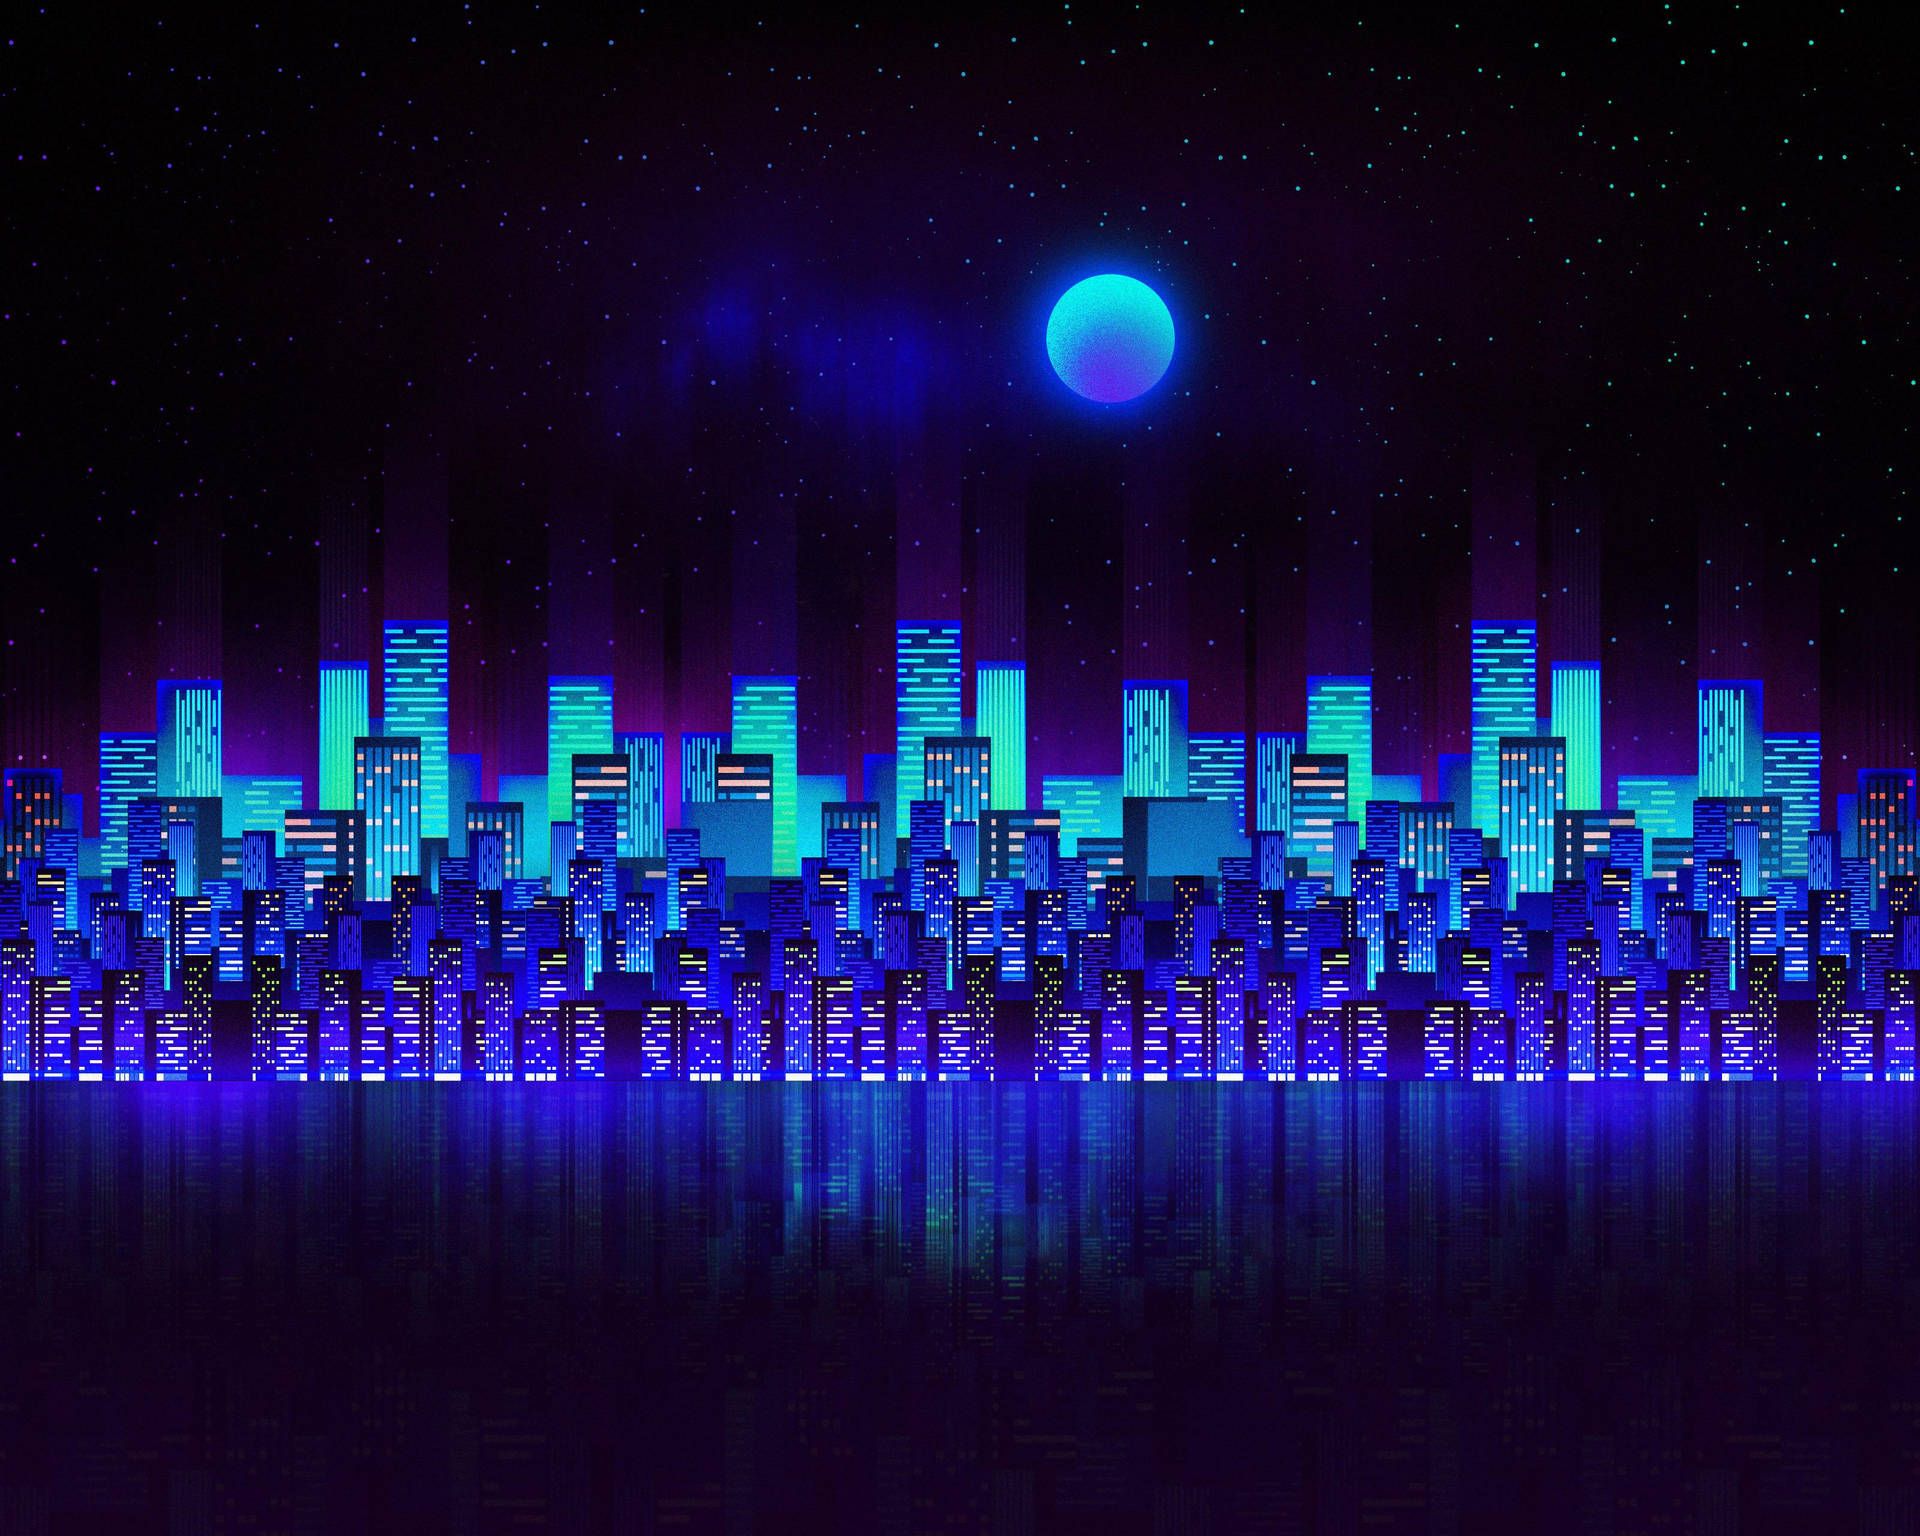 A city skyline at night with blue neon lights - Neon blue, neon